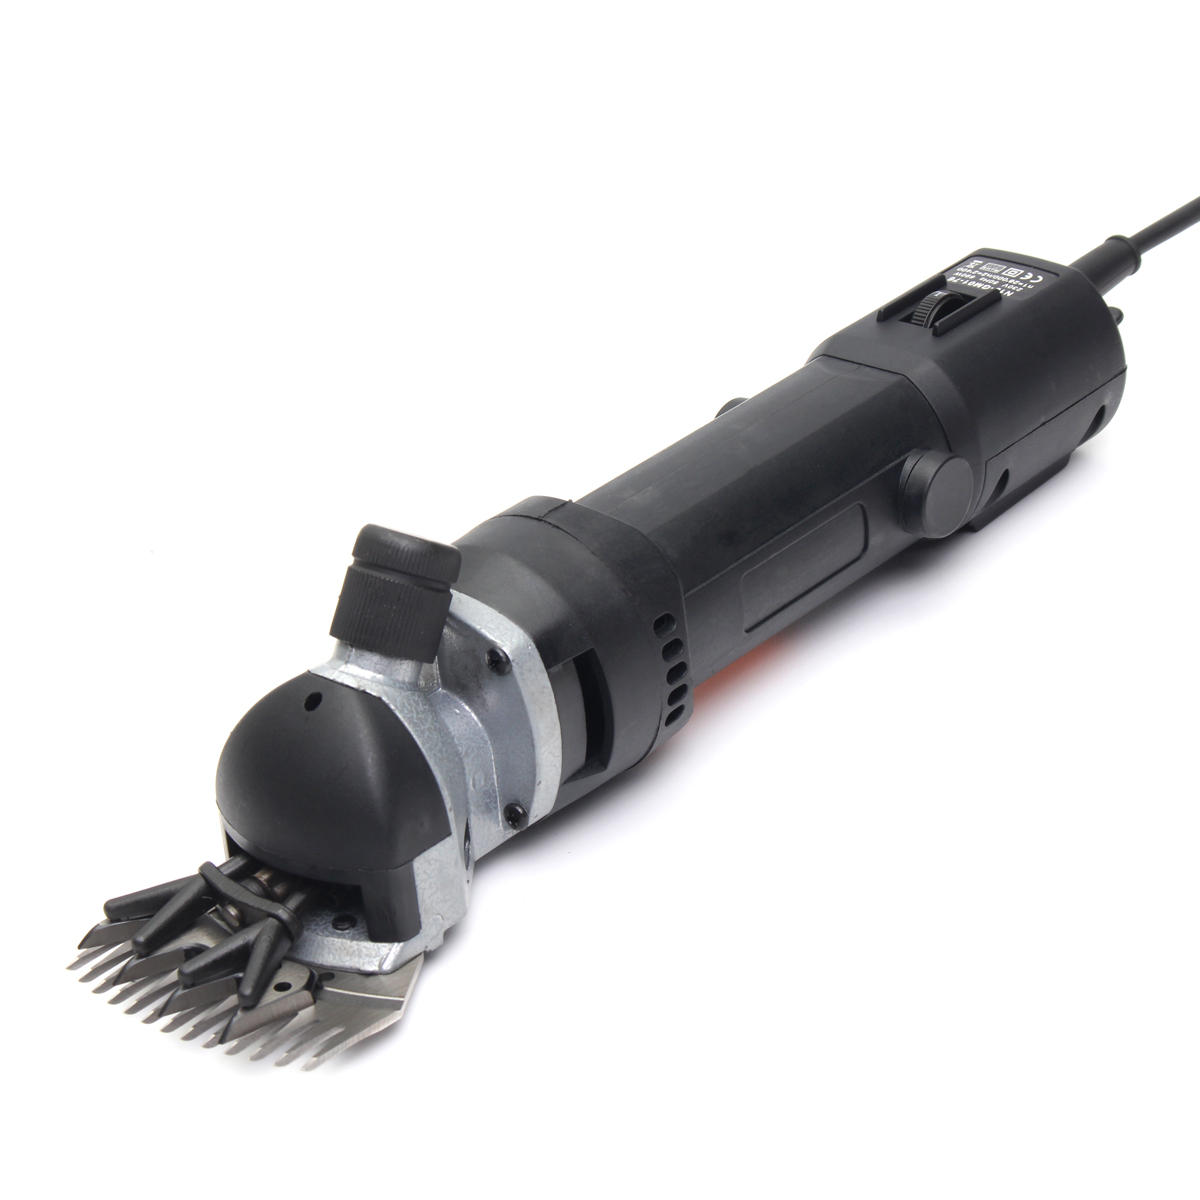 6 Speeds Electric Sheep Clippers 690W Electric Shears Shearing Clipper Grooming Hair Trimmer